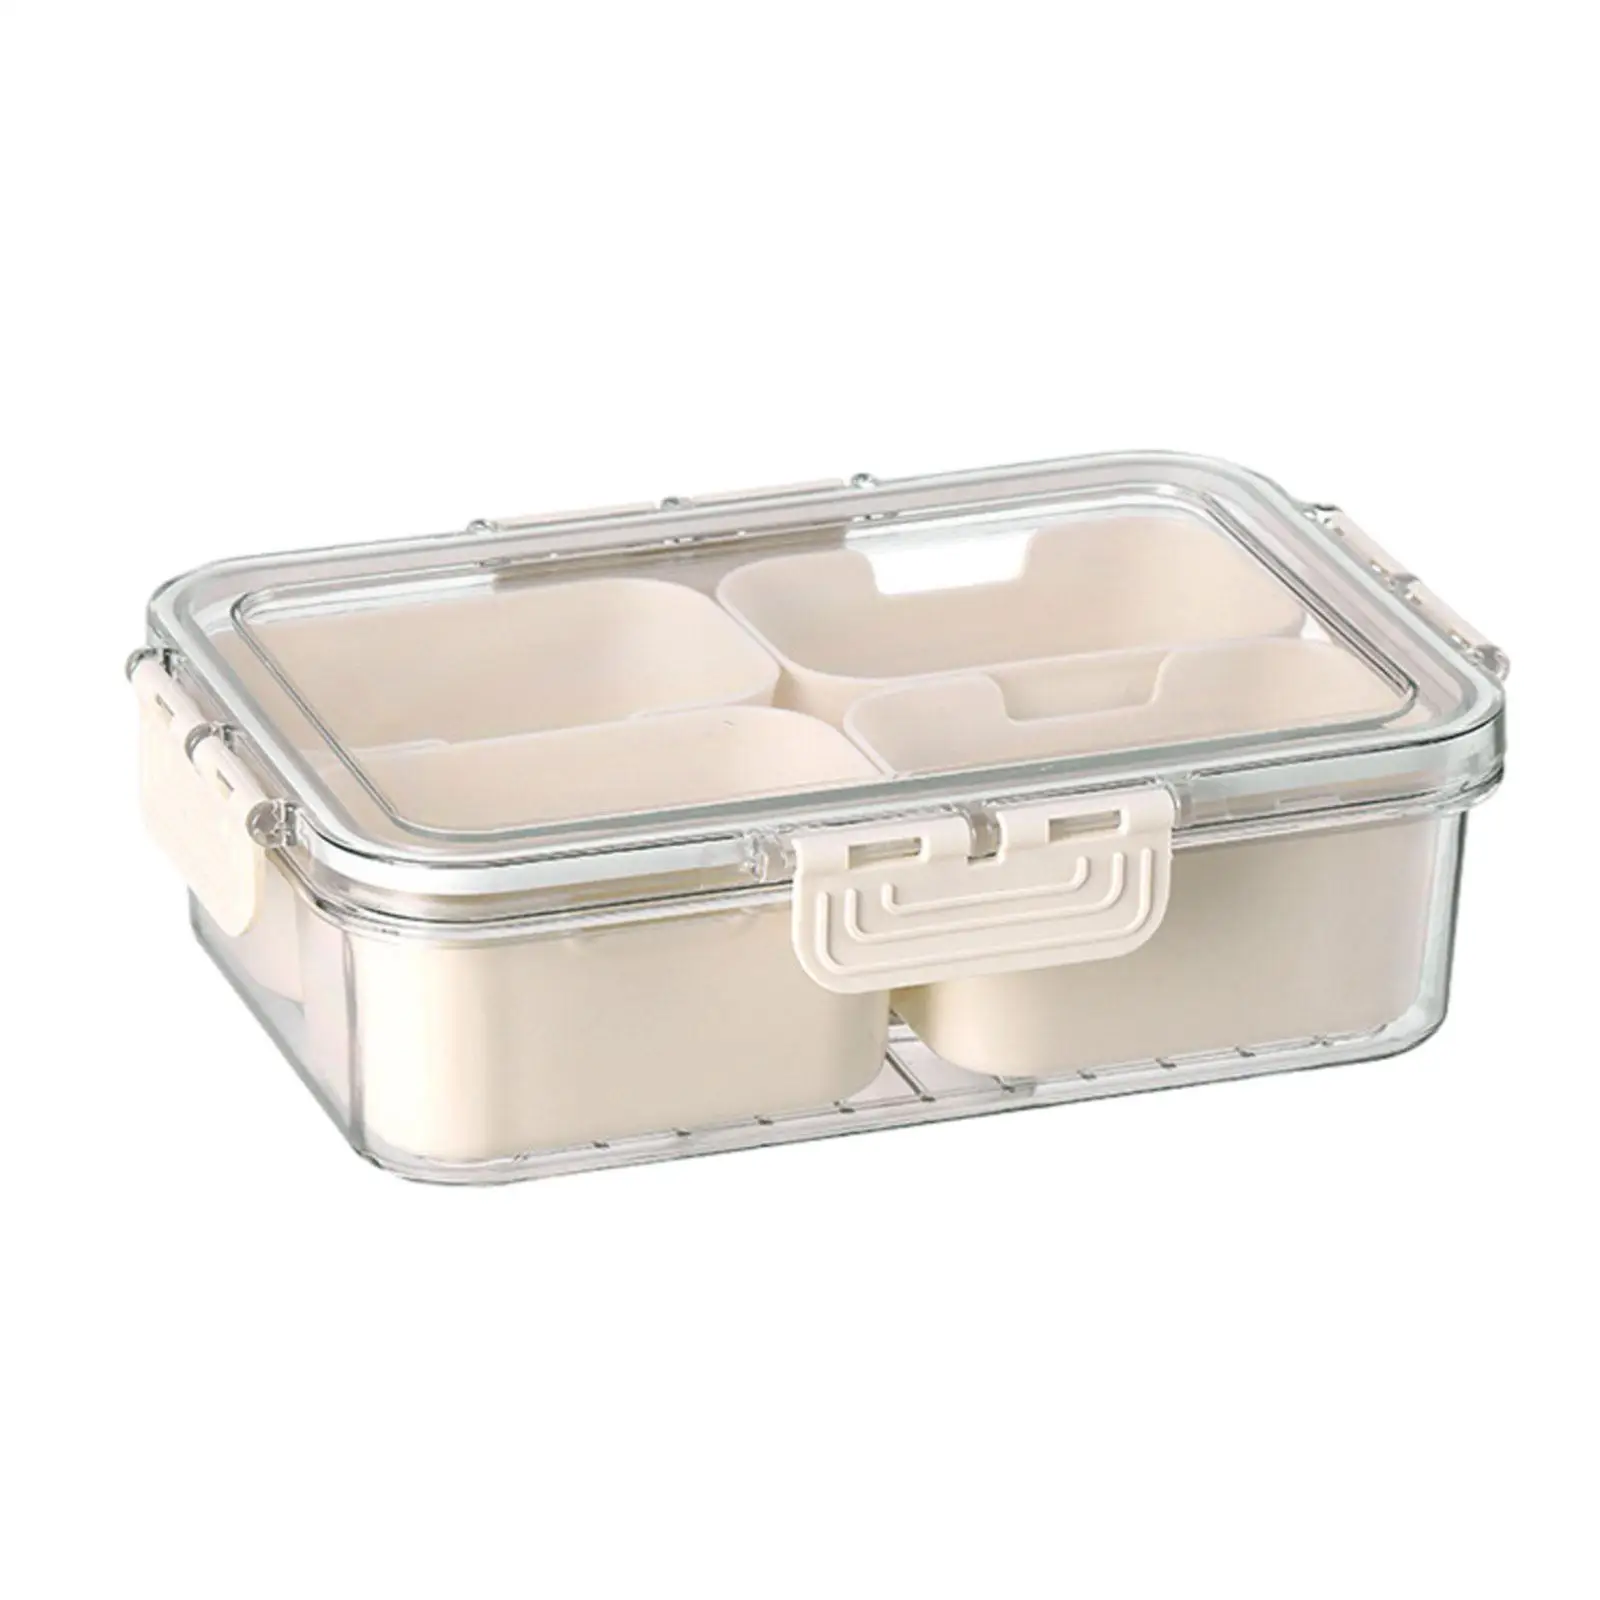 4 Compartments Snack Tray Serving Platter with Lid Square Divided Serving Tray for Hot Pot Prep Chip Biscuits Desserts